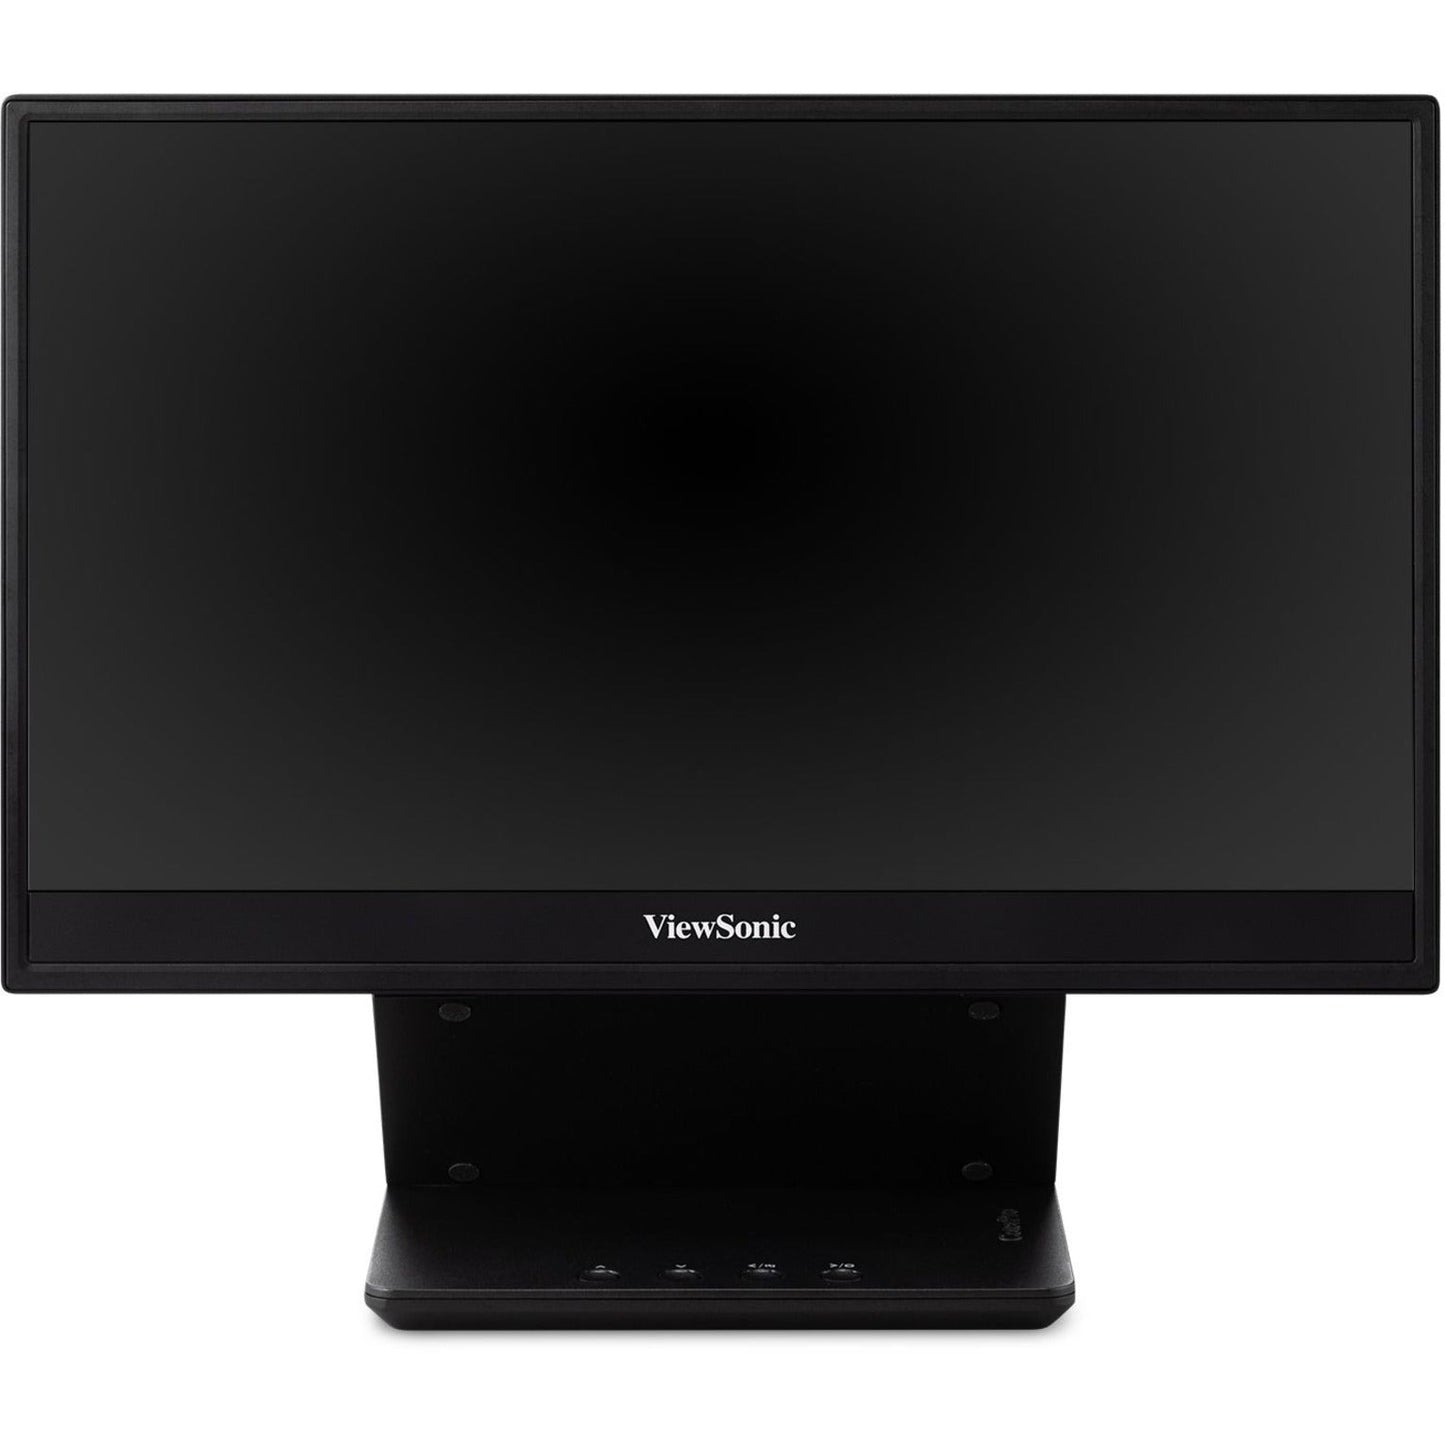 ViewSonic VP16-OLED 15.6 Inch 1080p Portable OLED Monitor with 2 Way Powered 40W USB C Pantone Validated Factory Calibrated Built in Ergonomic Stand with Protective Cover